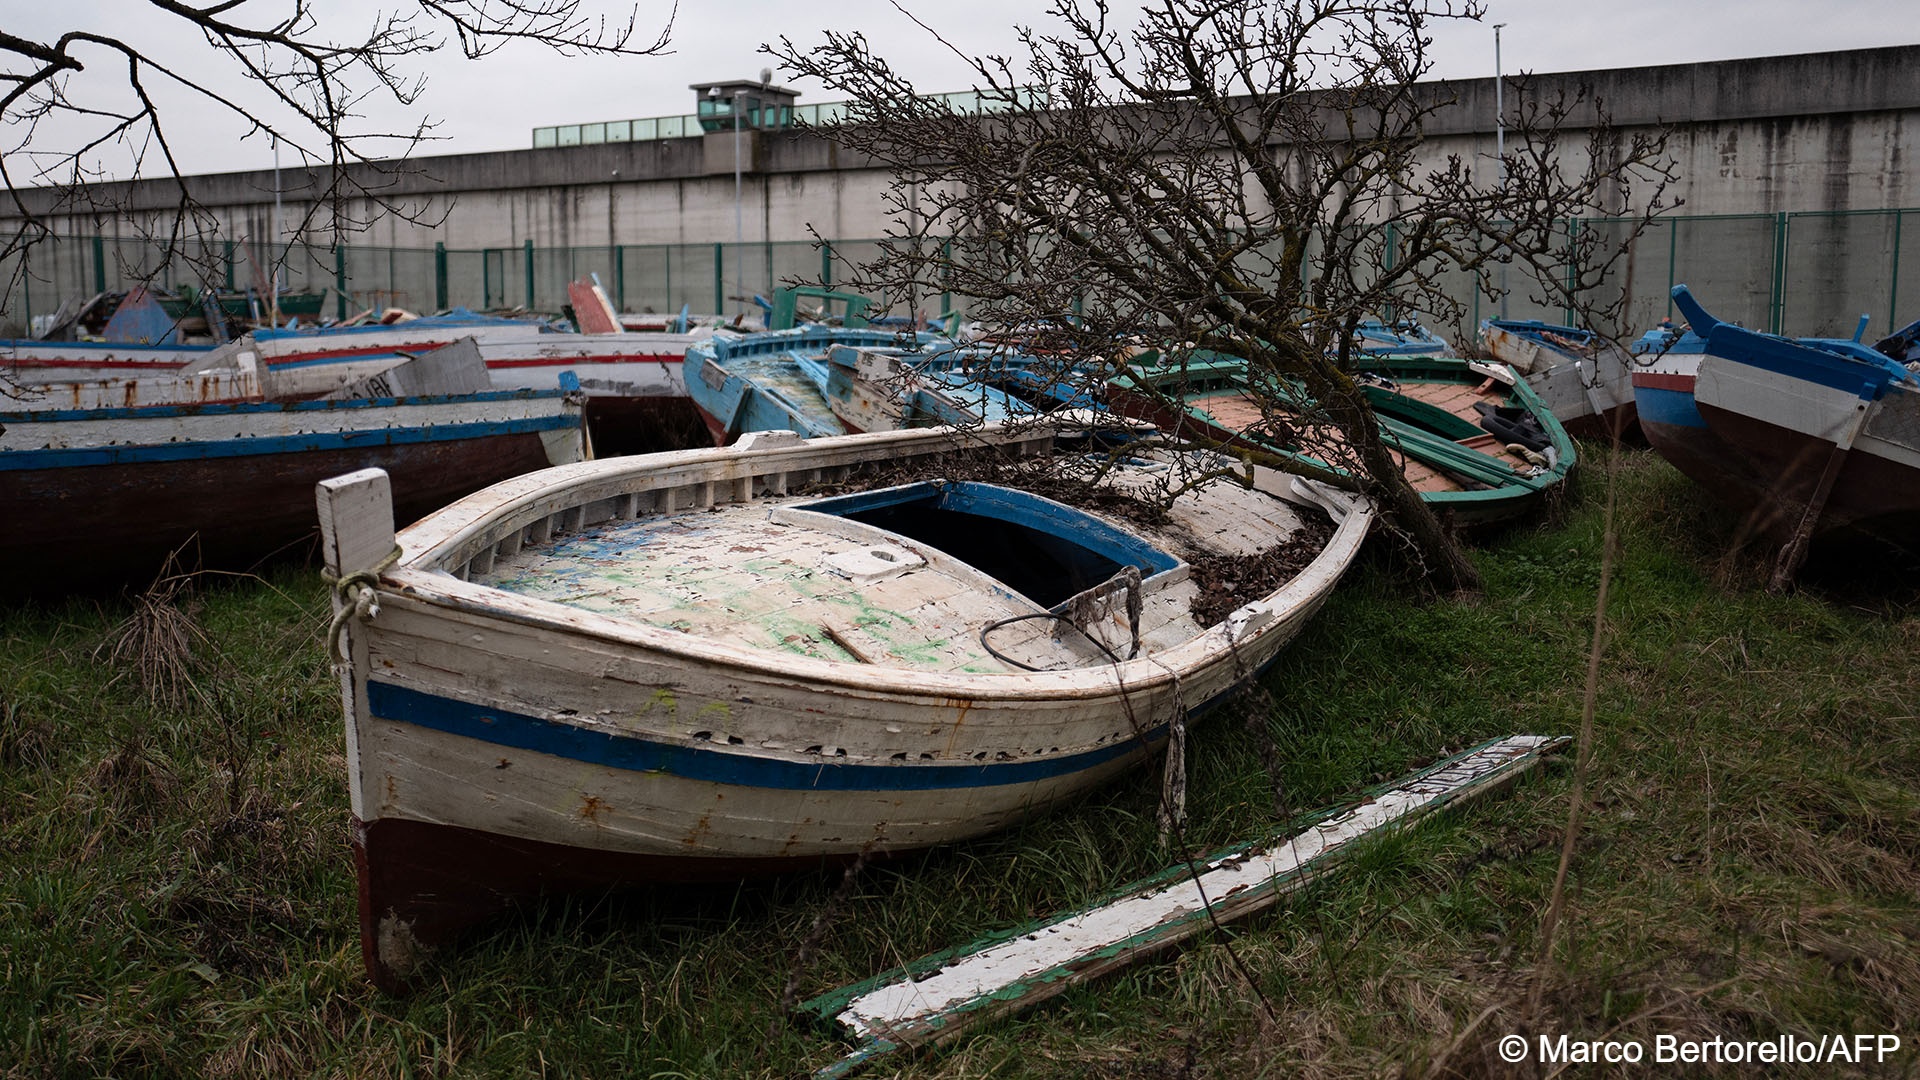 Rickety boats that are no longer seaworthy rest high and dry